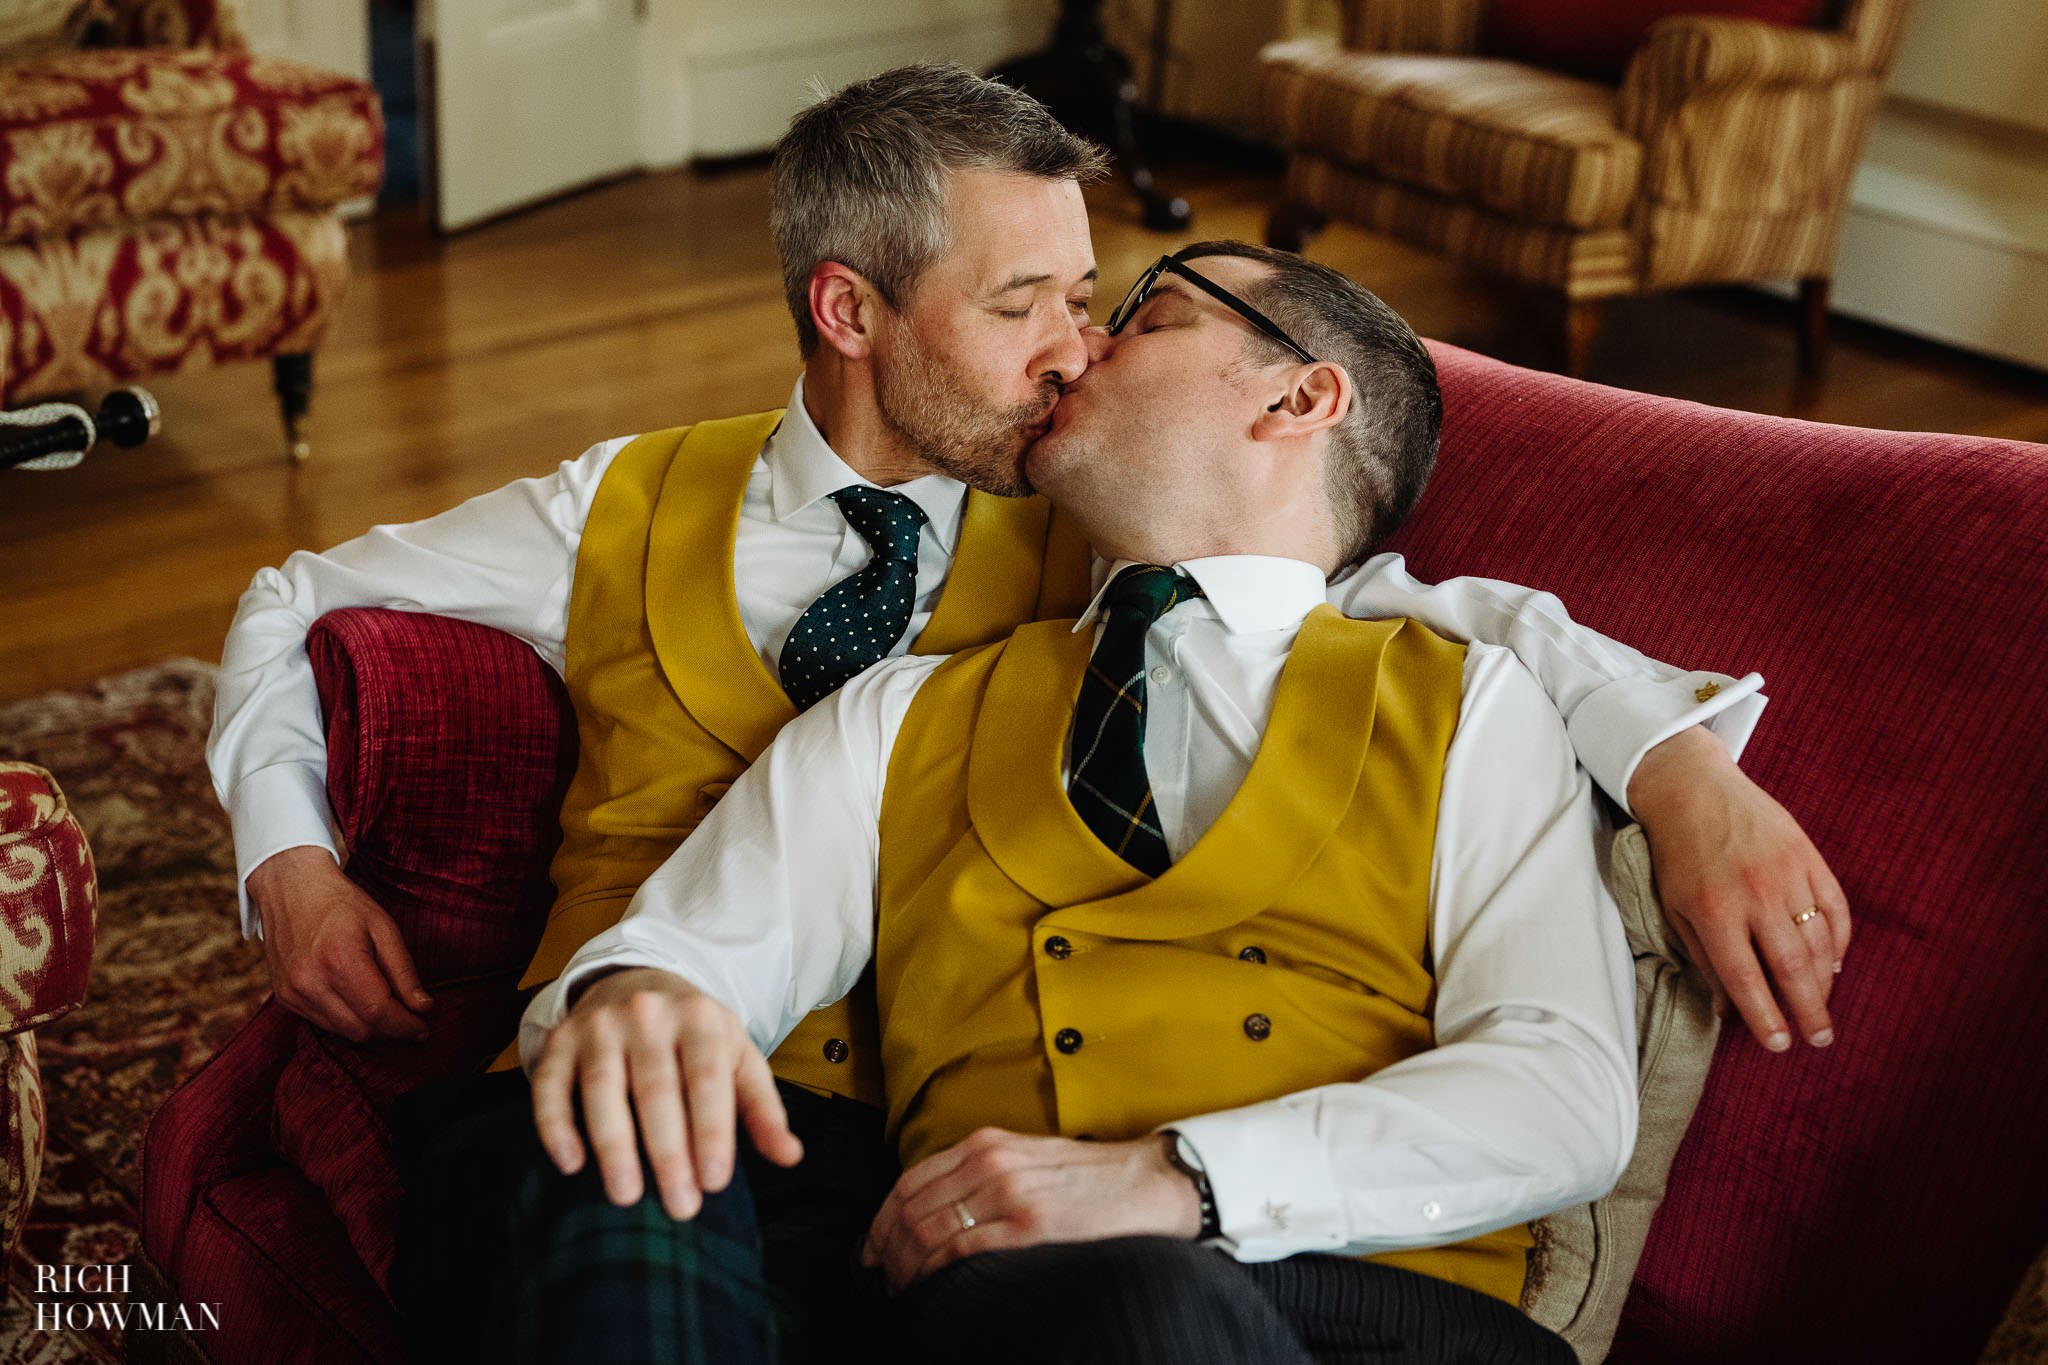 grooms kiss as they recline after their ceremony, captured by inner temple wedding photographer Rich Howman